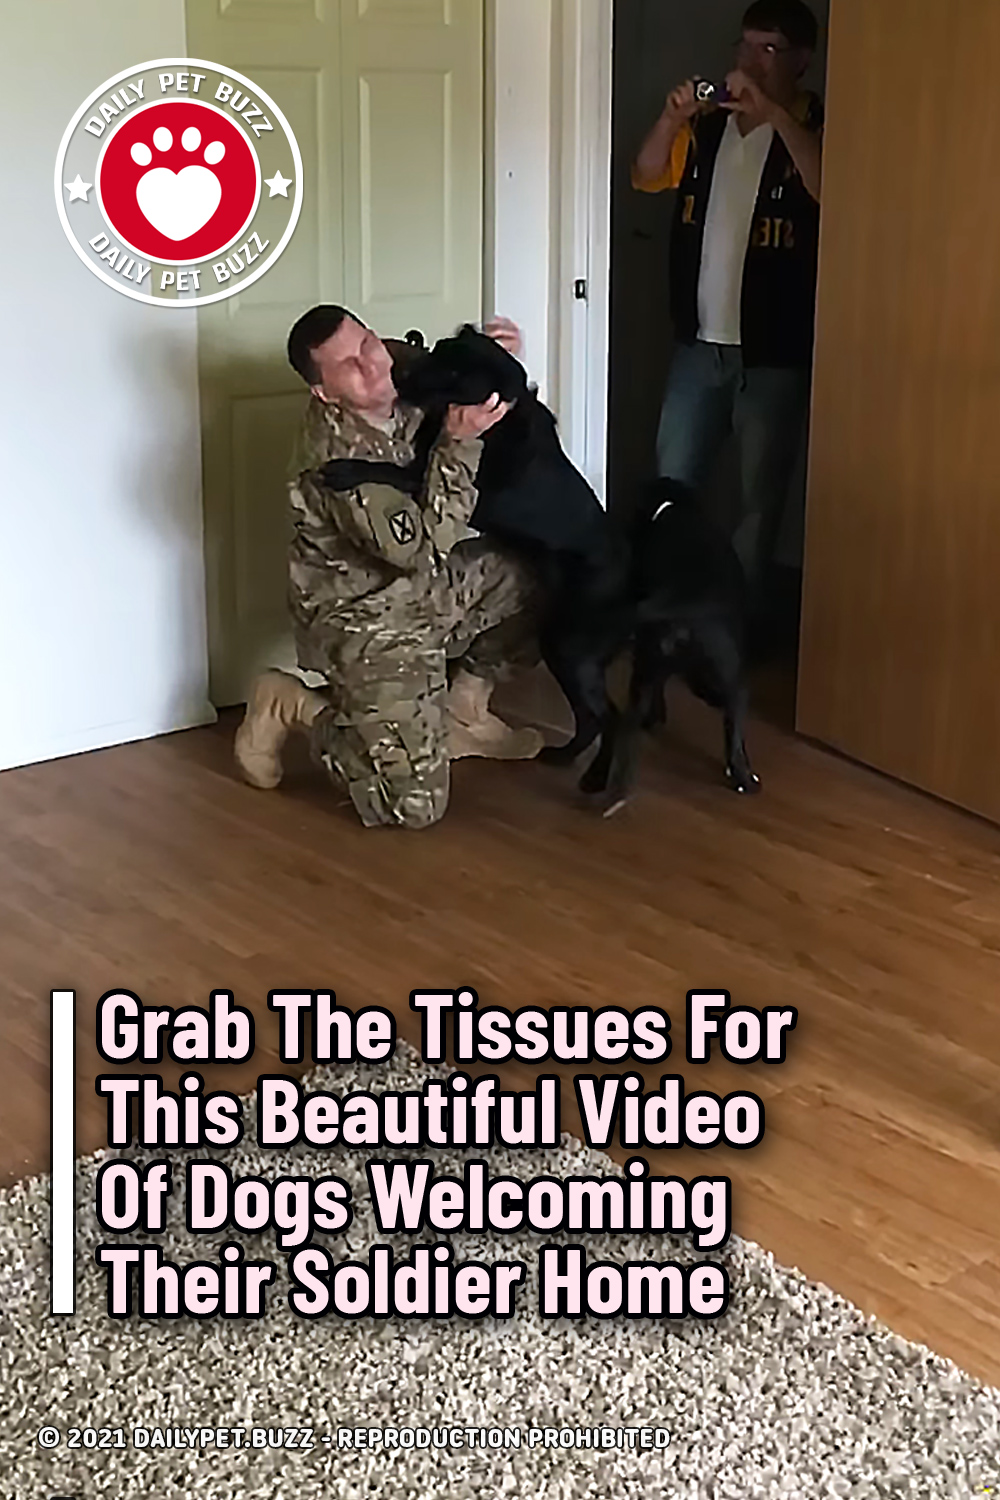 Grab The Tissues For This Beautiful Video Of Dogs Welcoming Their Soldier Home